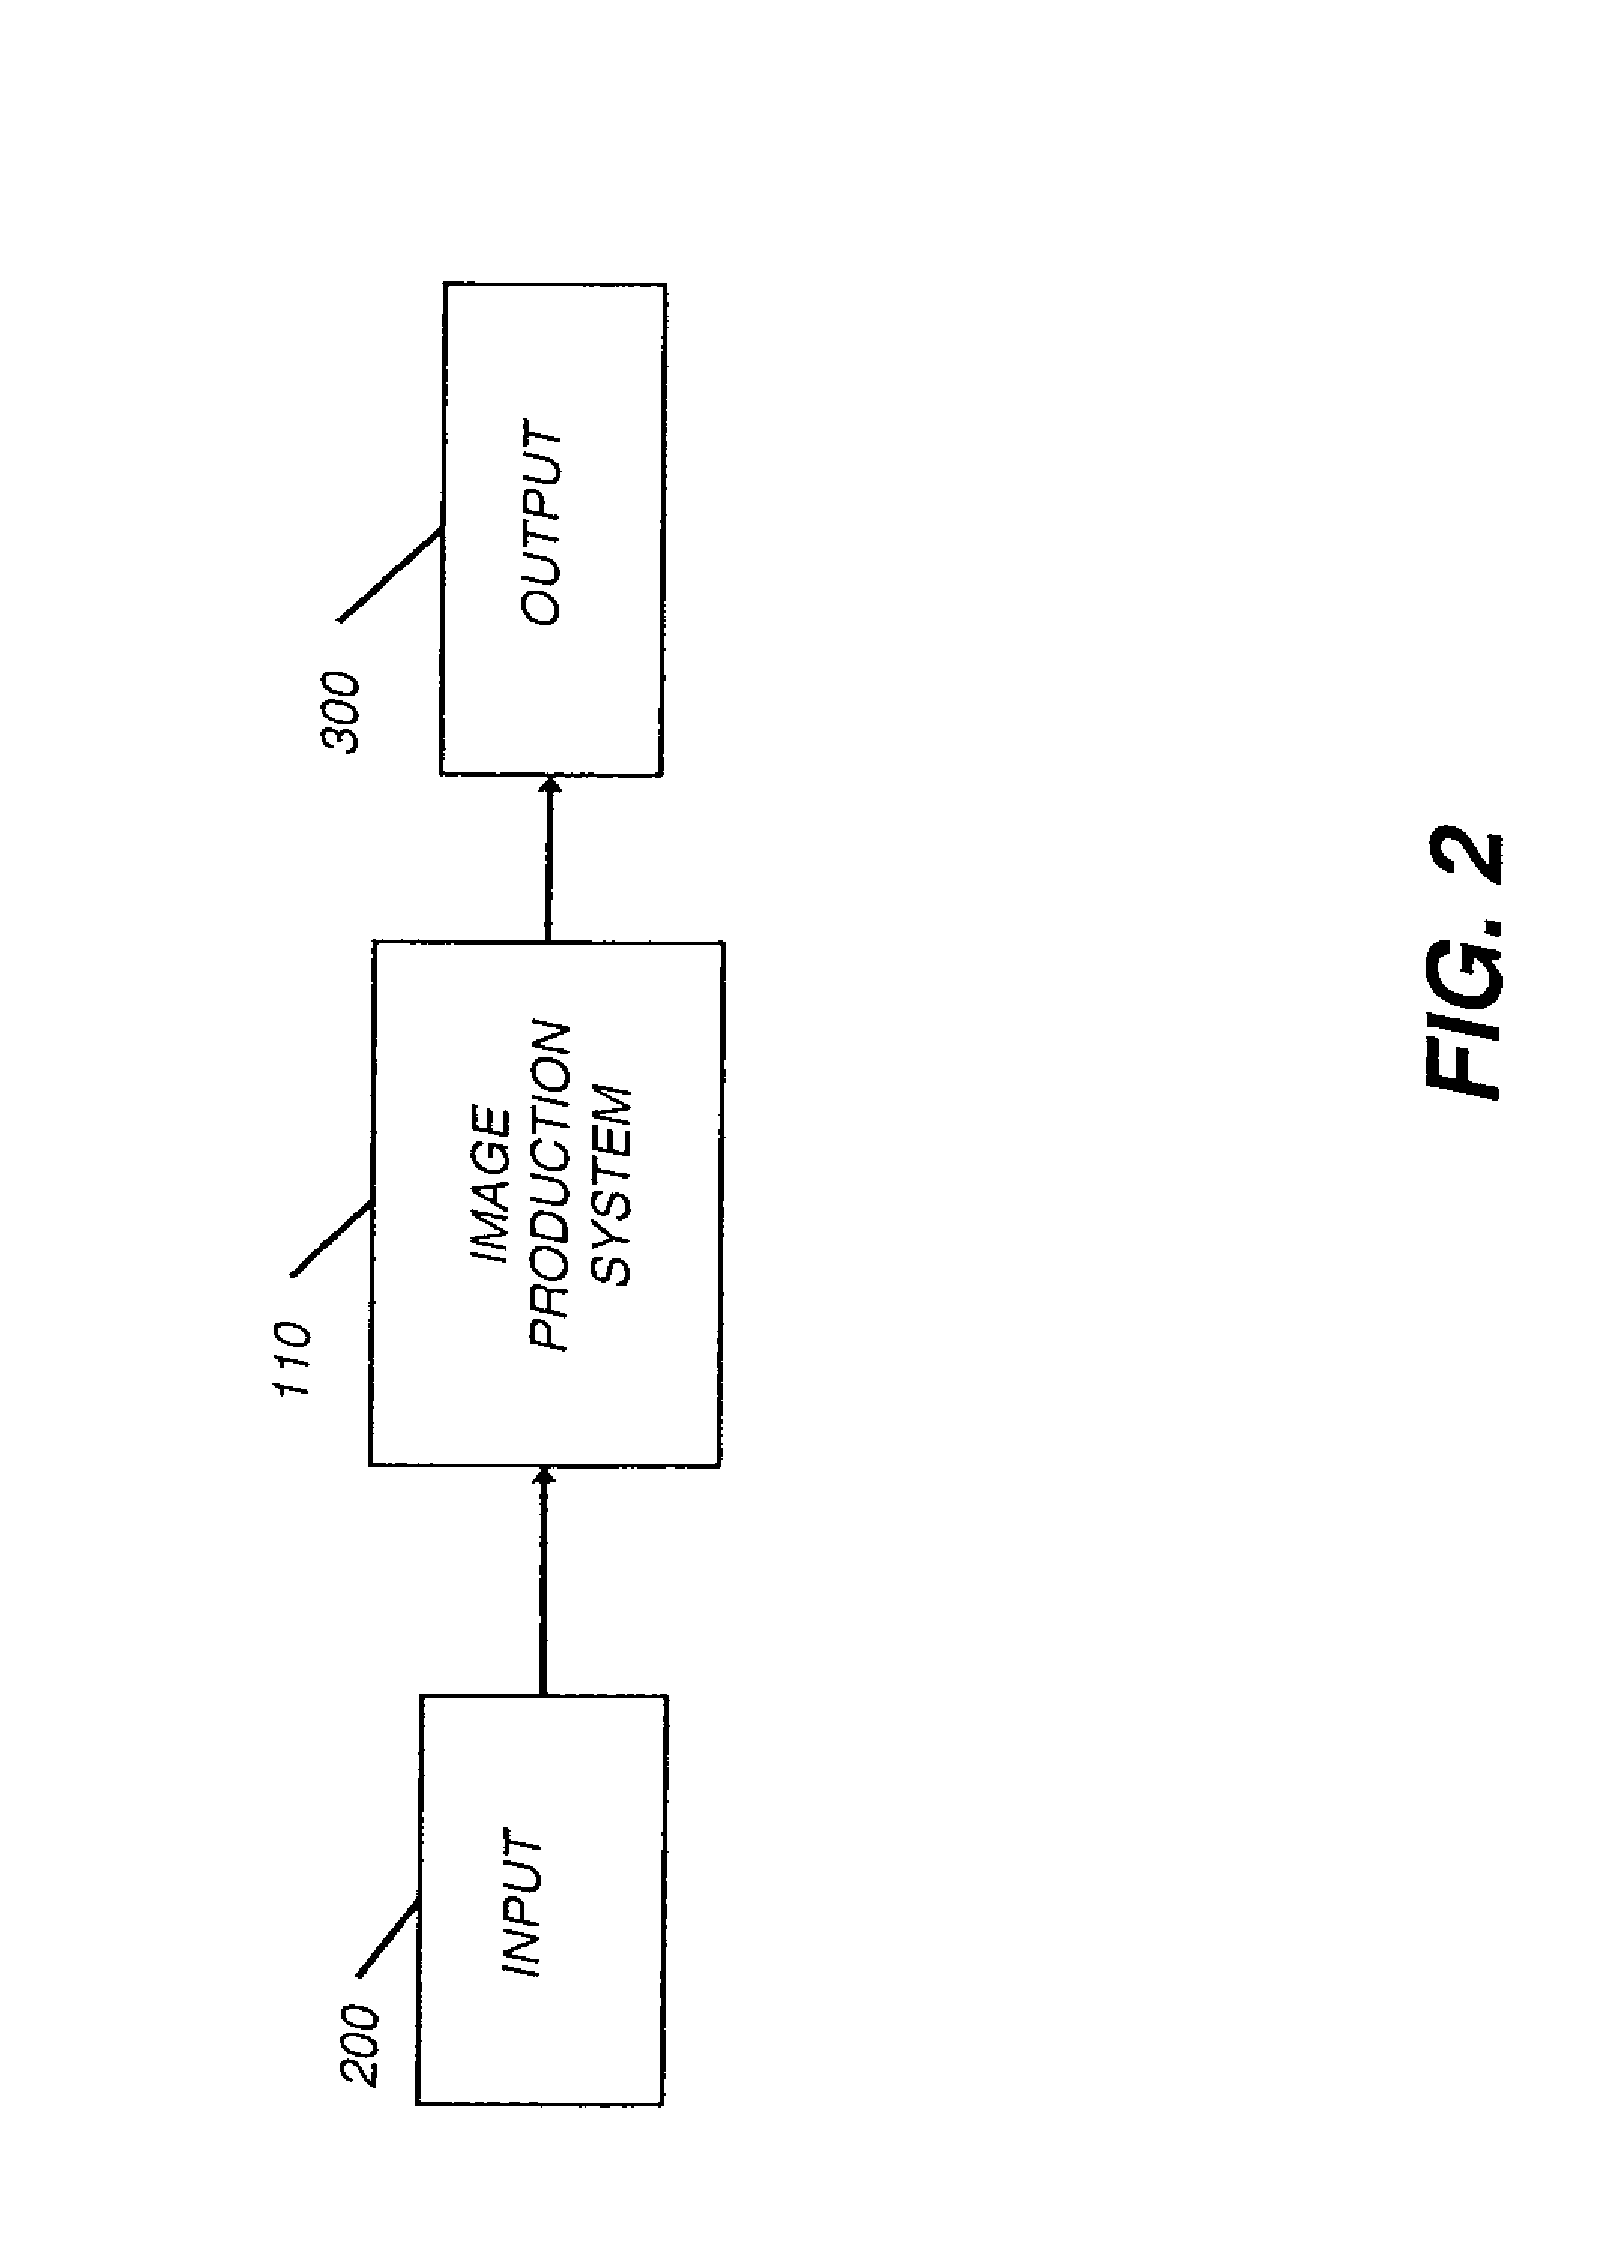 Image capture and display configuration